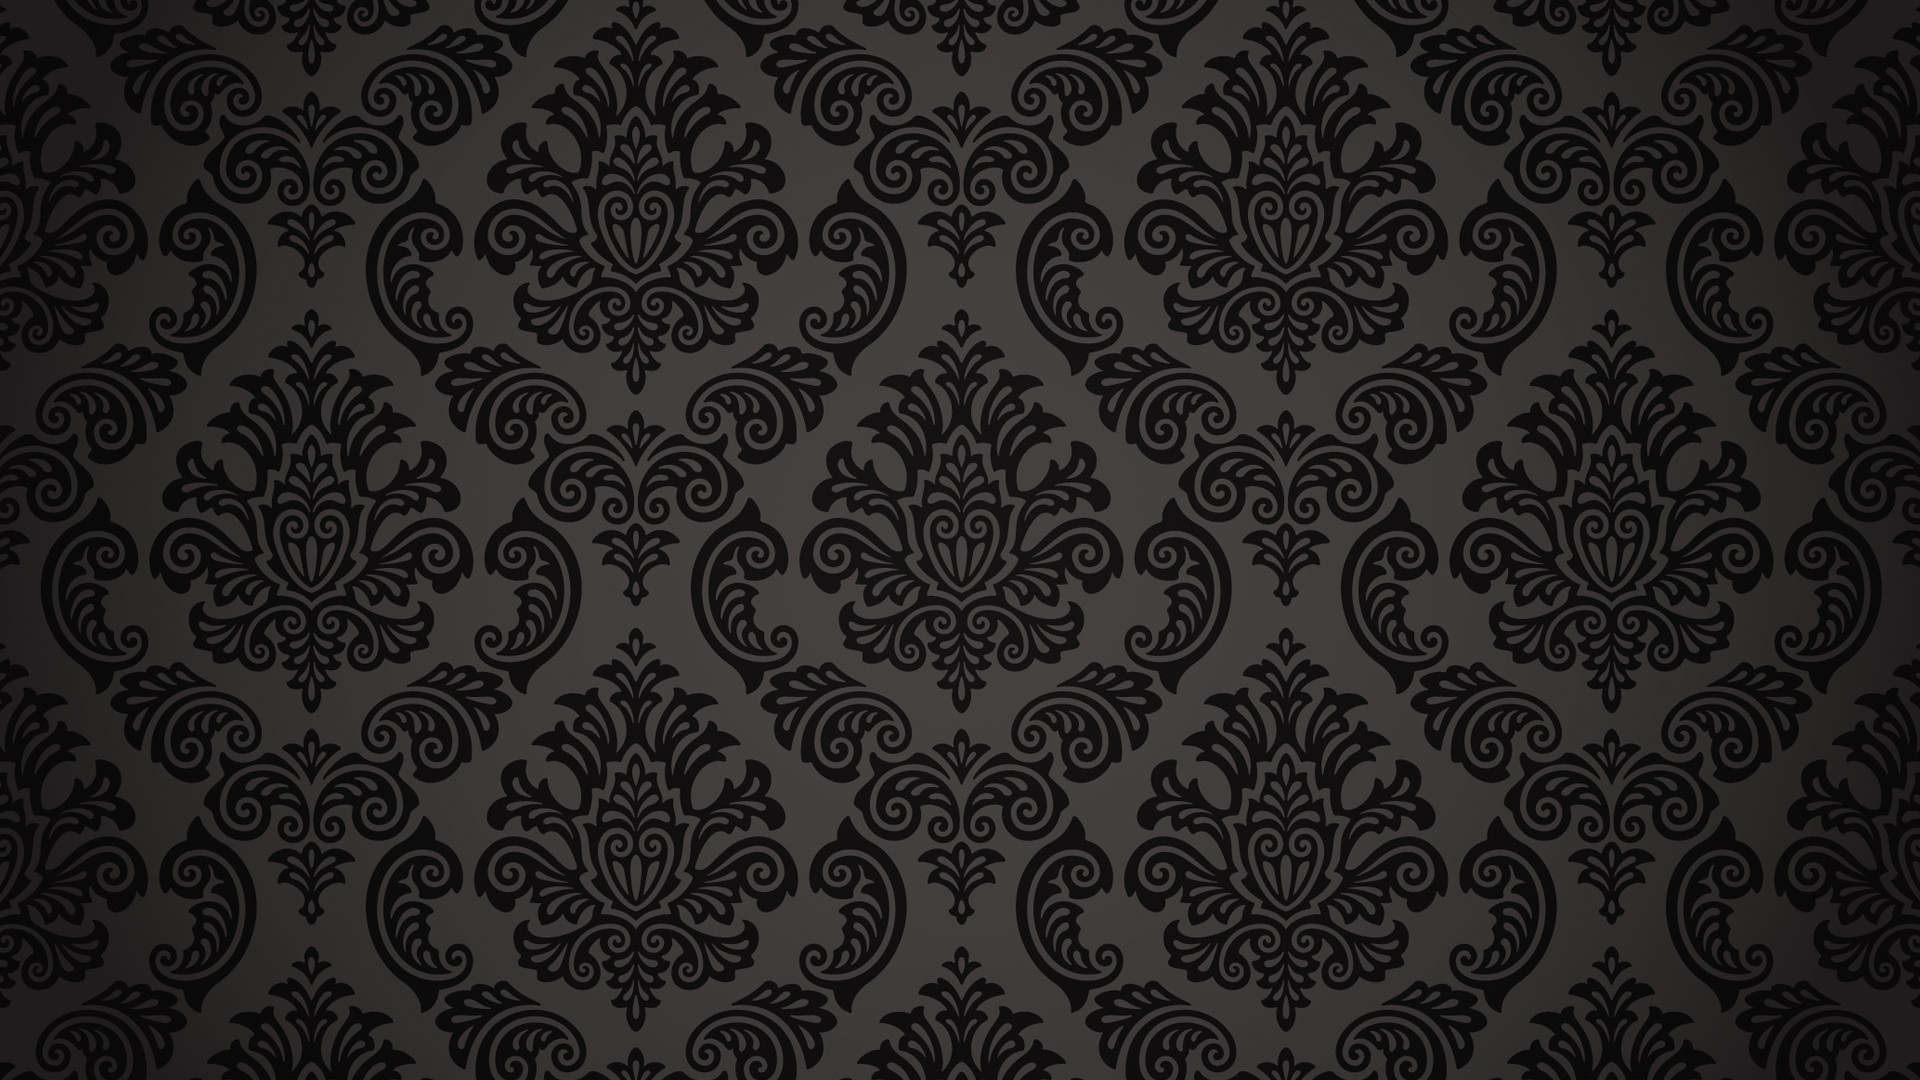 General 1920x1080 abstract pattern floral dark background